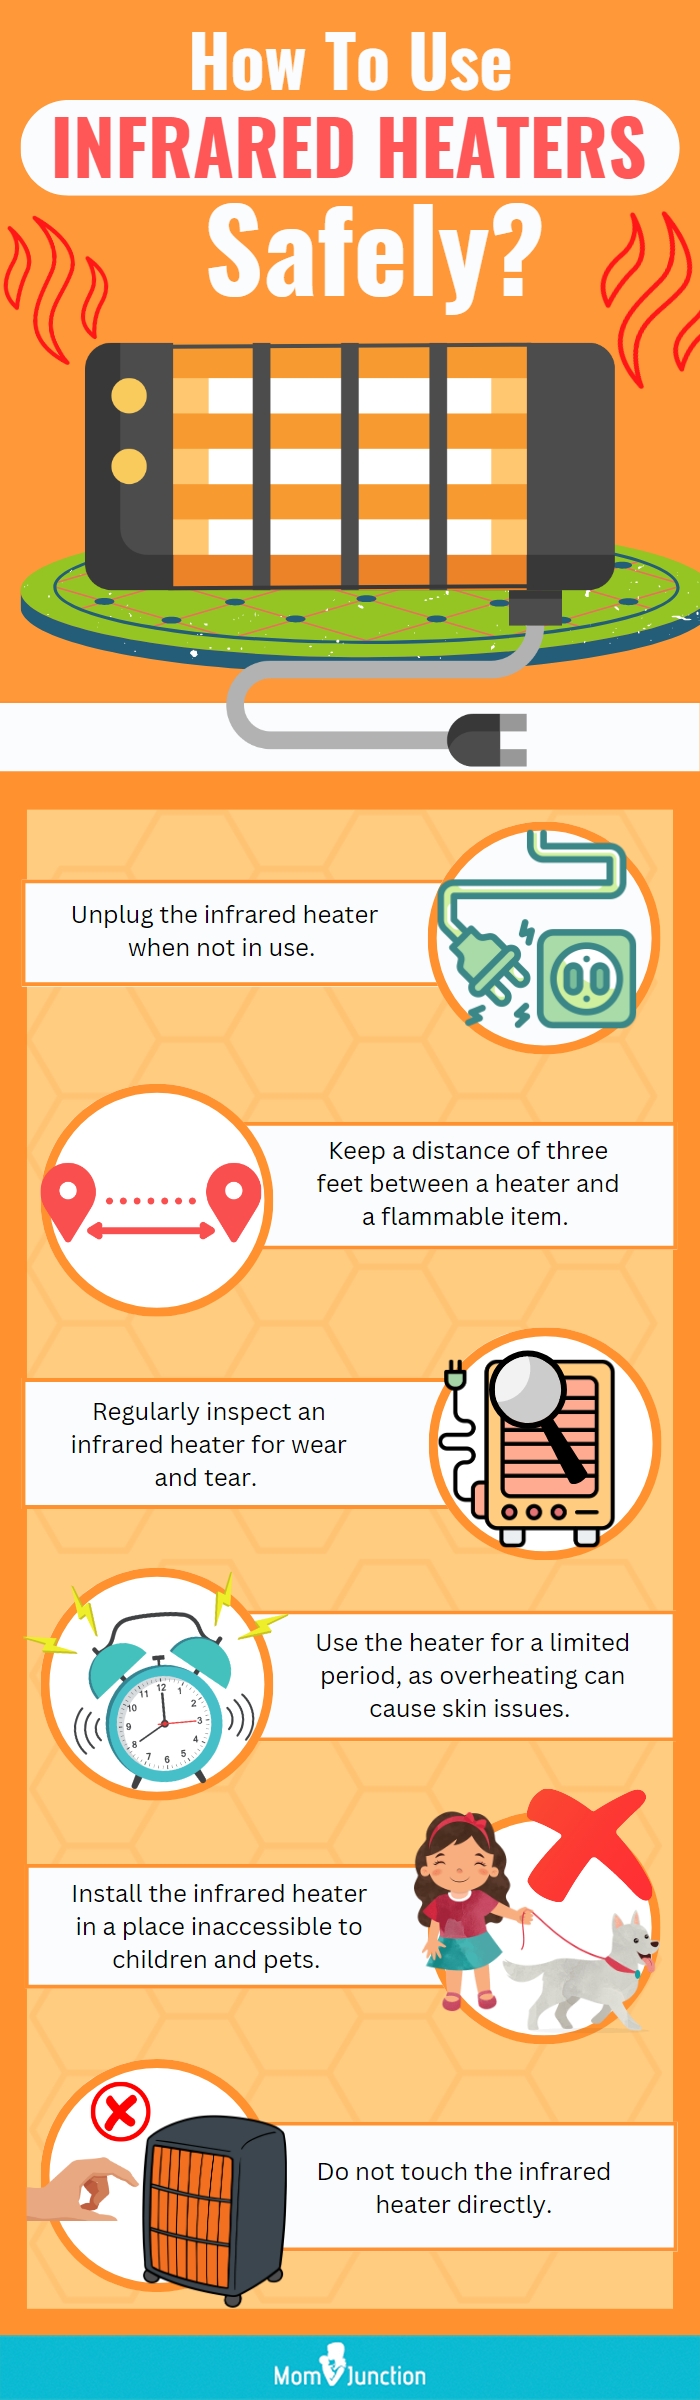 How To Use Infrared Heaters Safely